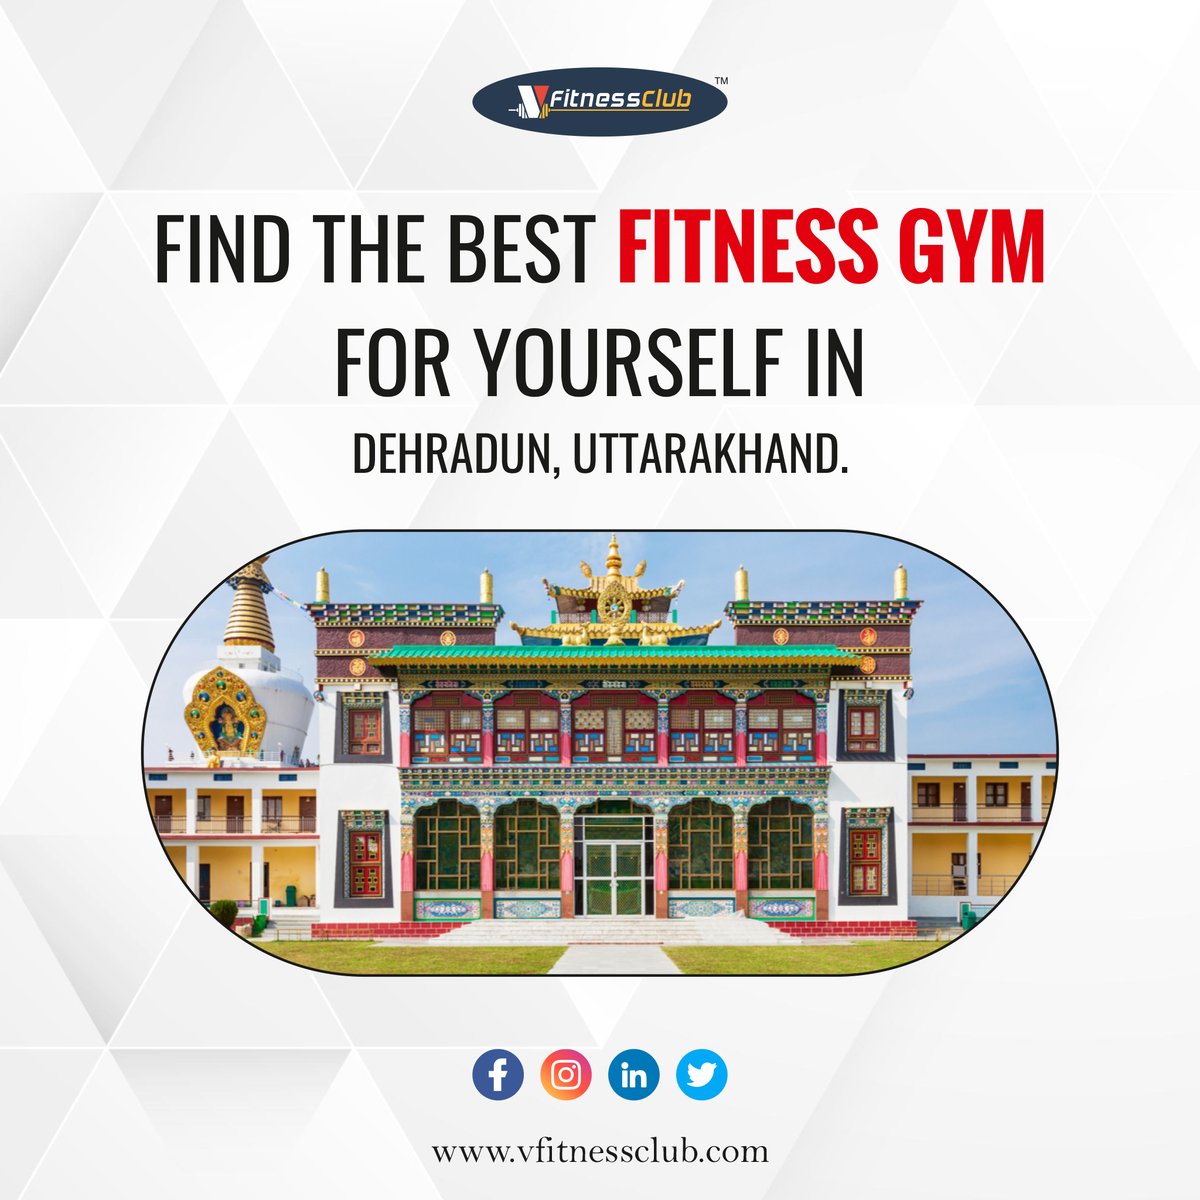 Whether you are a fitness enthusiast or a newbie wanting to get in shape, if you are in #Dehradun, find your nearest gyms with different #fitnessactivities using VFitnessClub.

Visit the website to start your search!
#vfitnessclub #gymmanagementsoftware #dehradunfitness